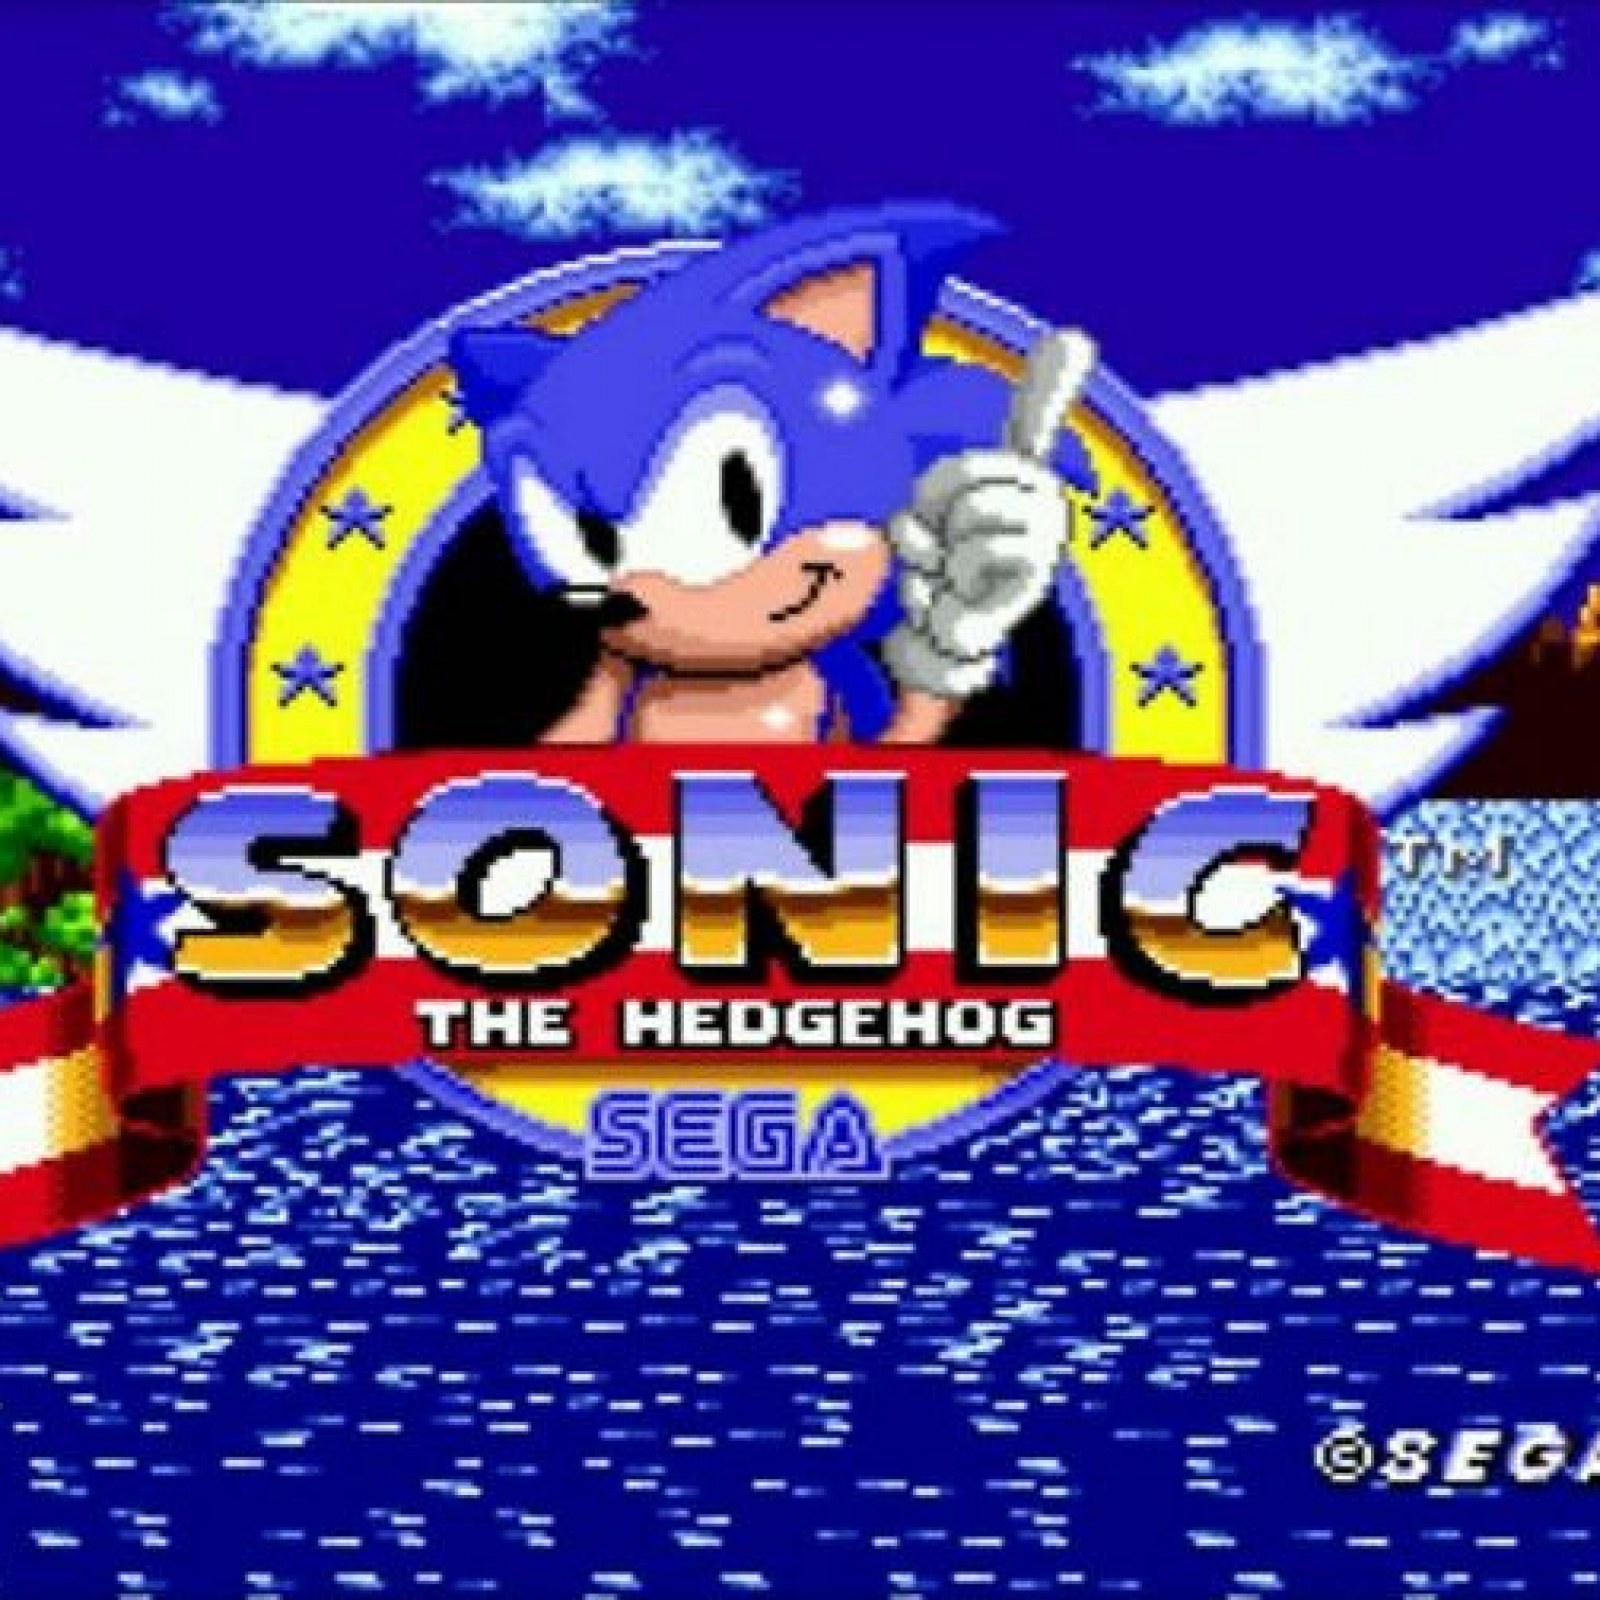 How Sonic The Hedgehog Was Directly Inspired By Bill Clinton and